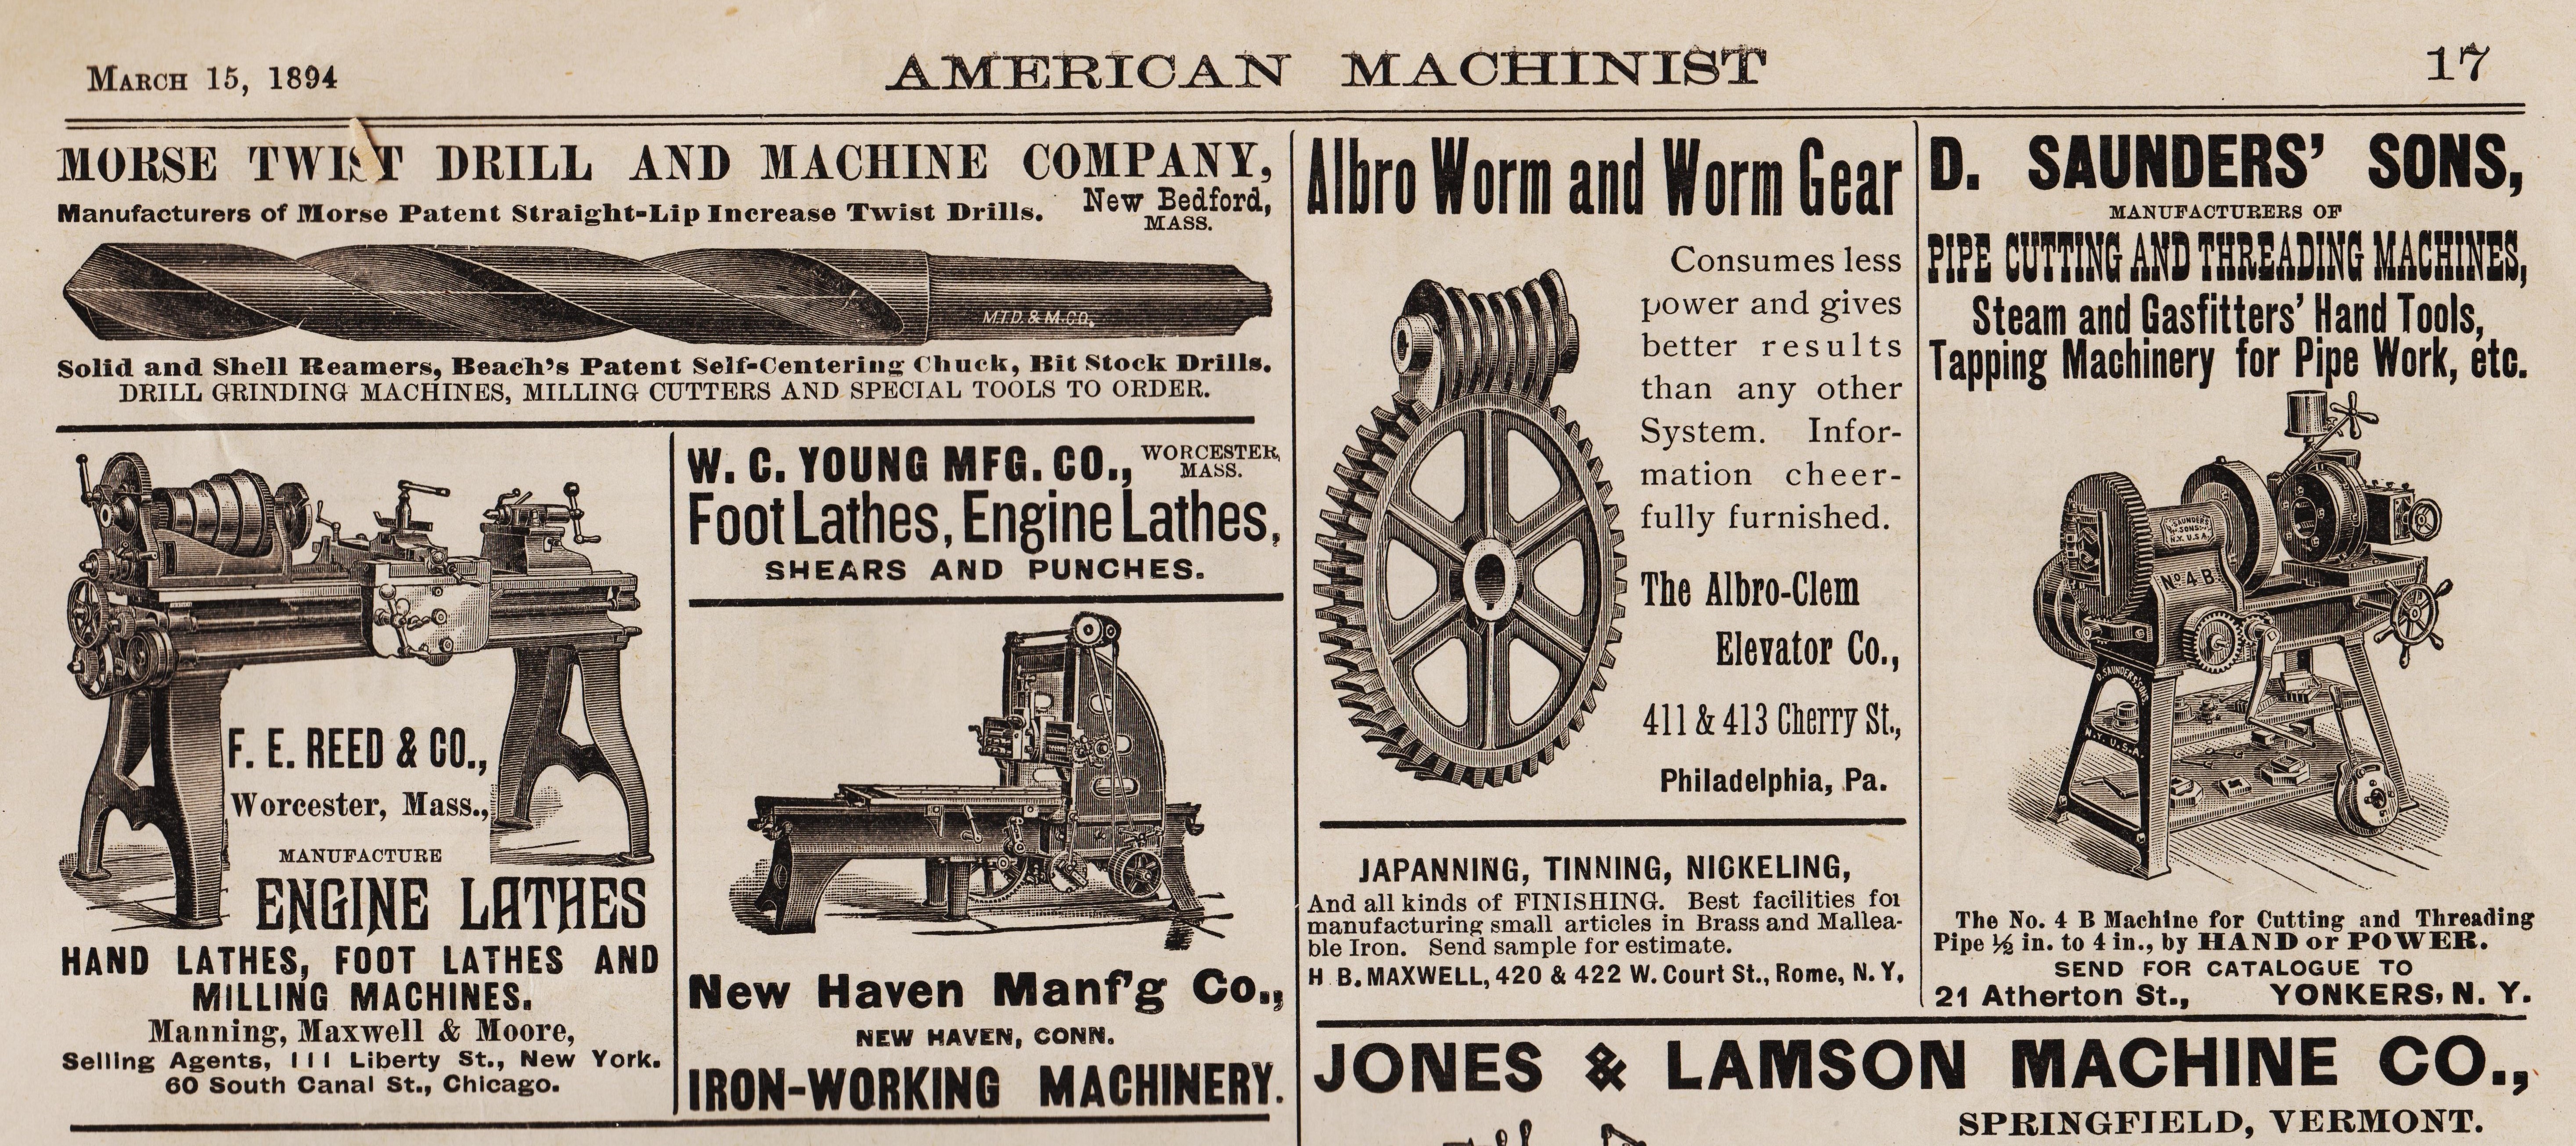 https://antiquemachinery.com/images-2020/American_Machinist-March-15-1894-pg-17-top-Ads.jpg